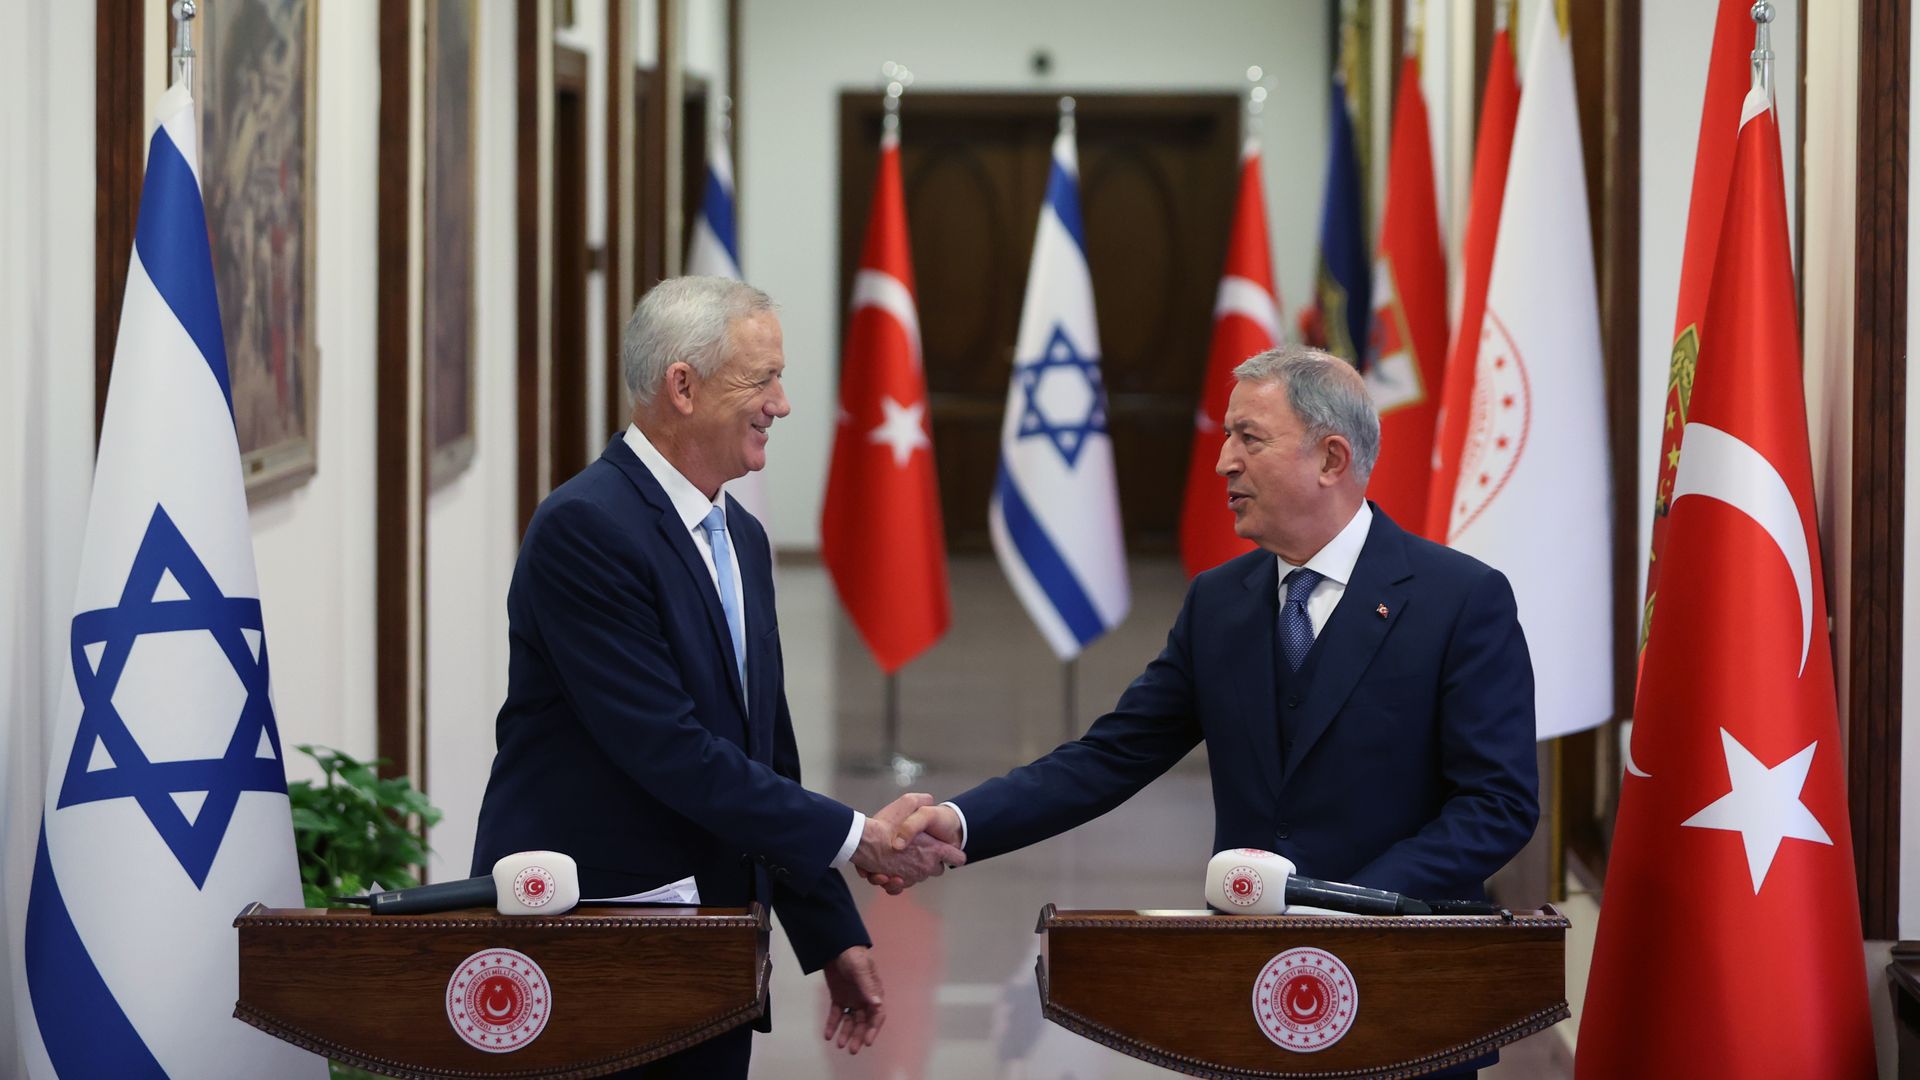  Israeli Defence Minister Benny Gantz (L) and Turkish Defence Minister Hulusi Akar (R) hold a joint press conference